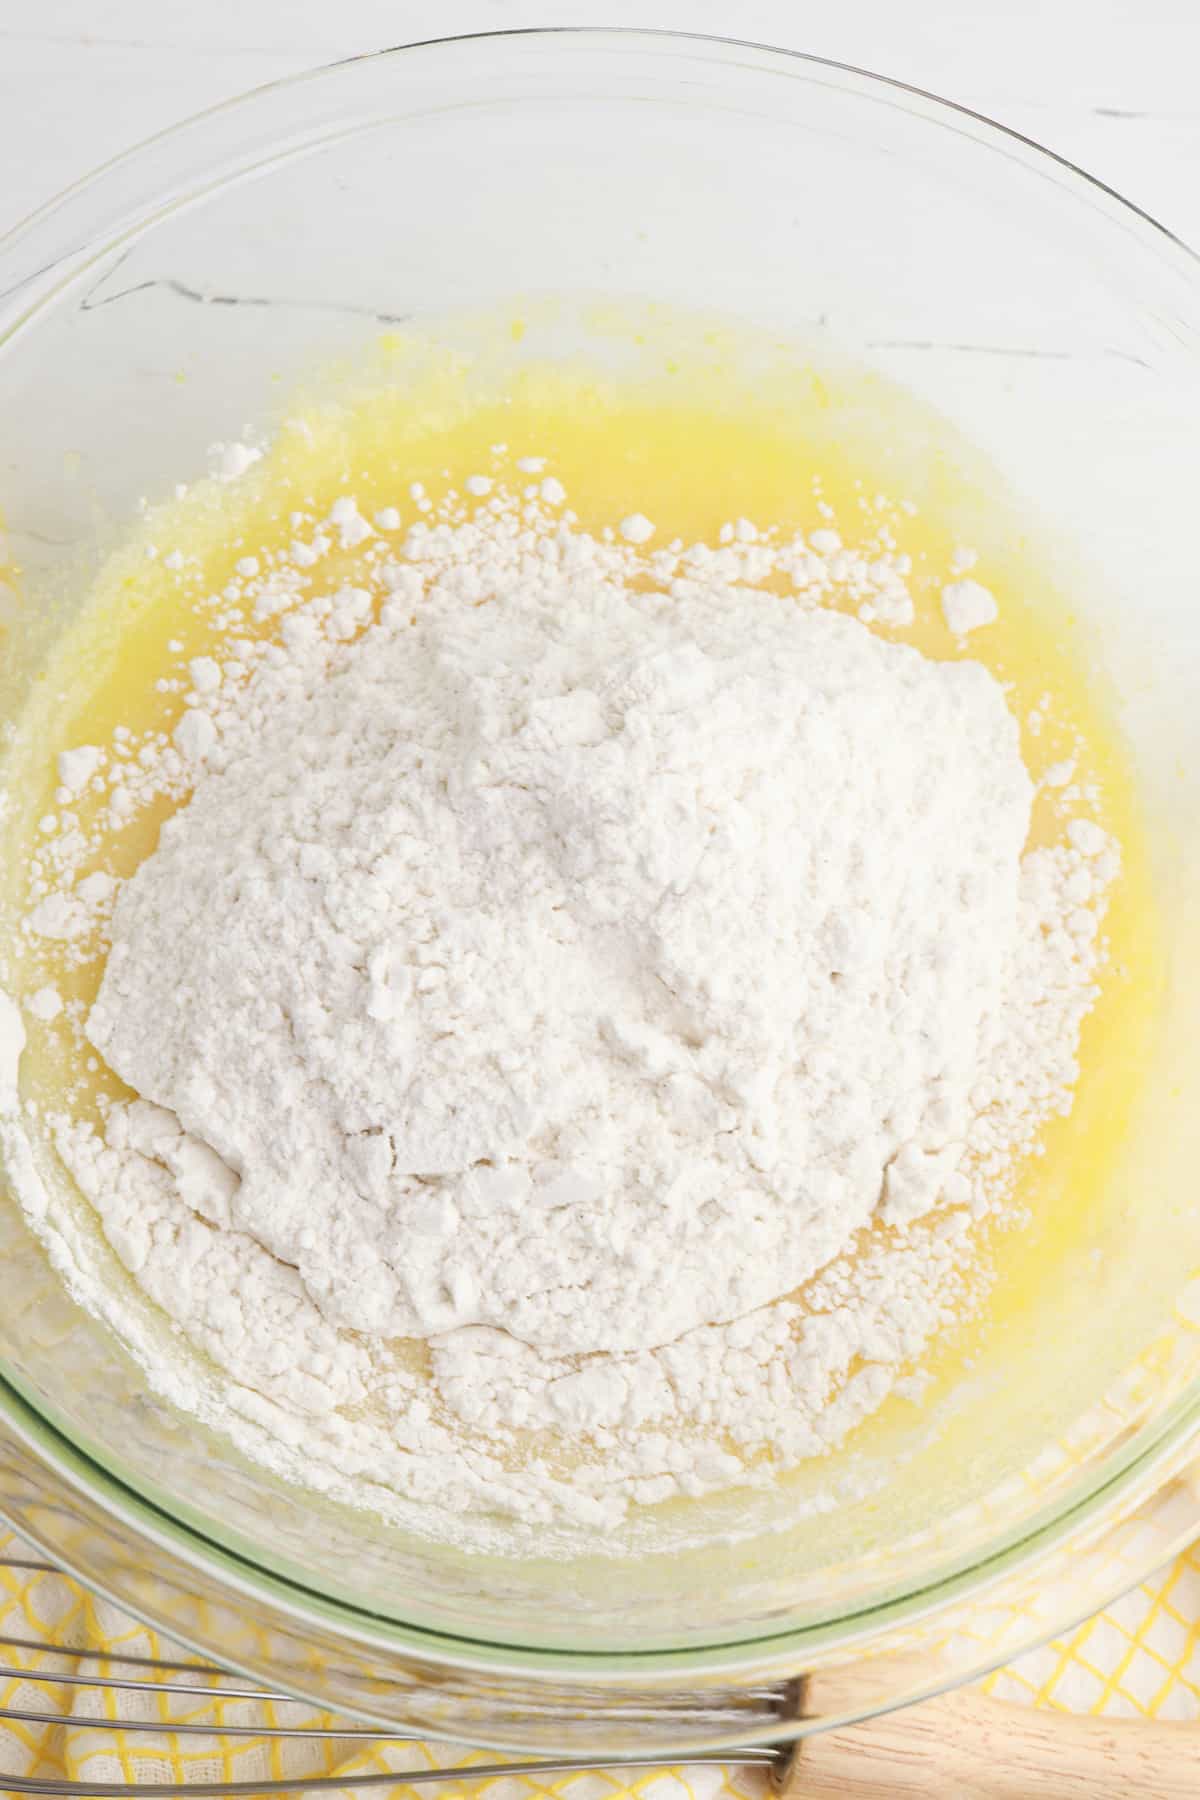 Flour and butter and other donut ingredients.